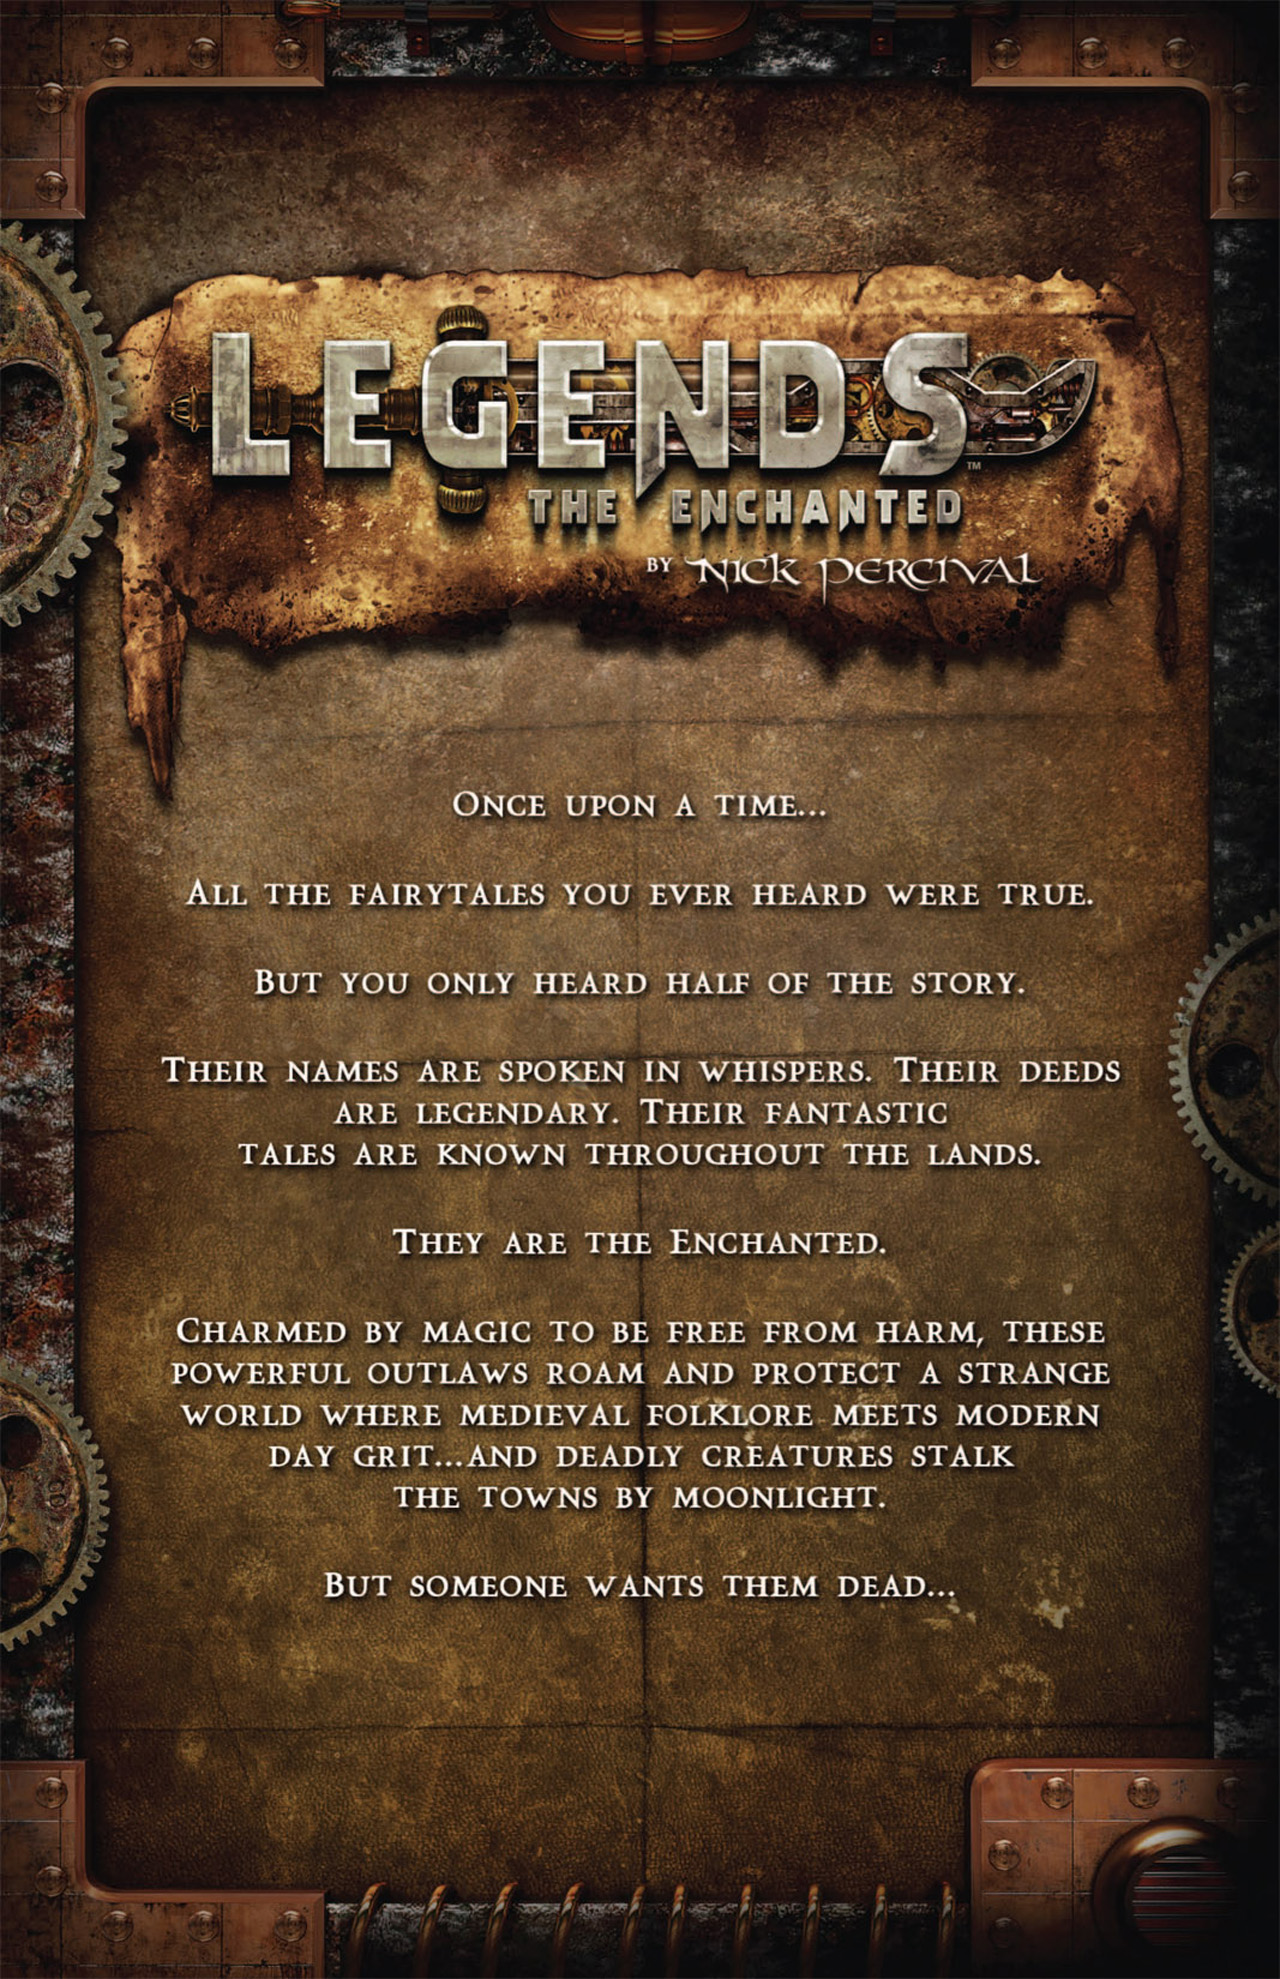 Read online Legends: The Enchanted comic -  Issue # TPB - 4